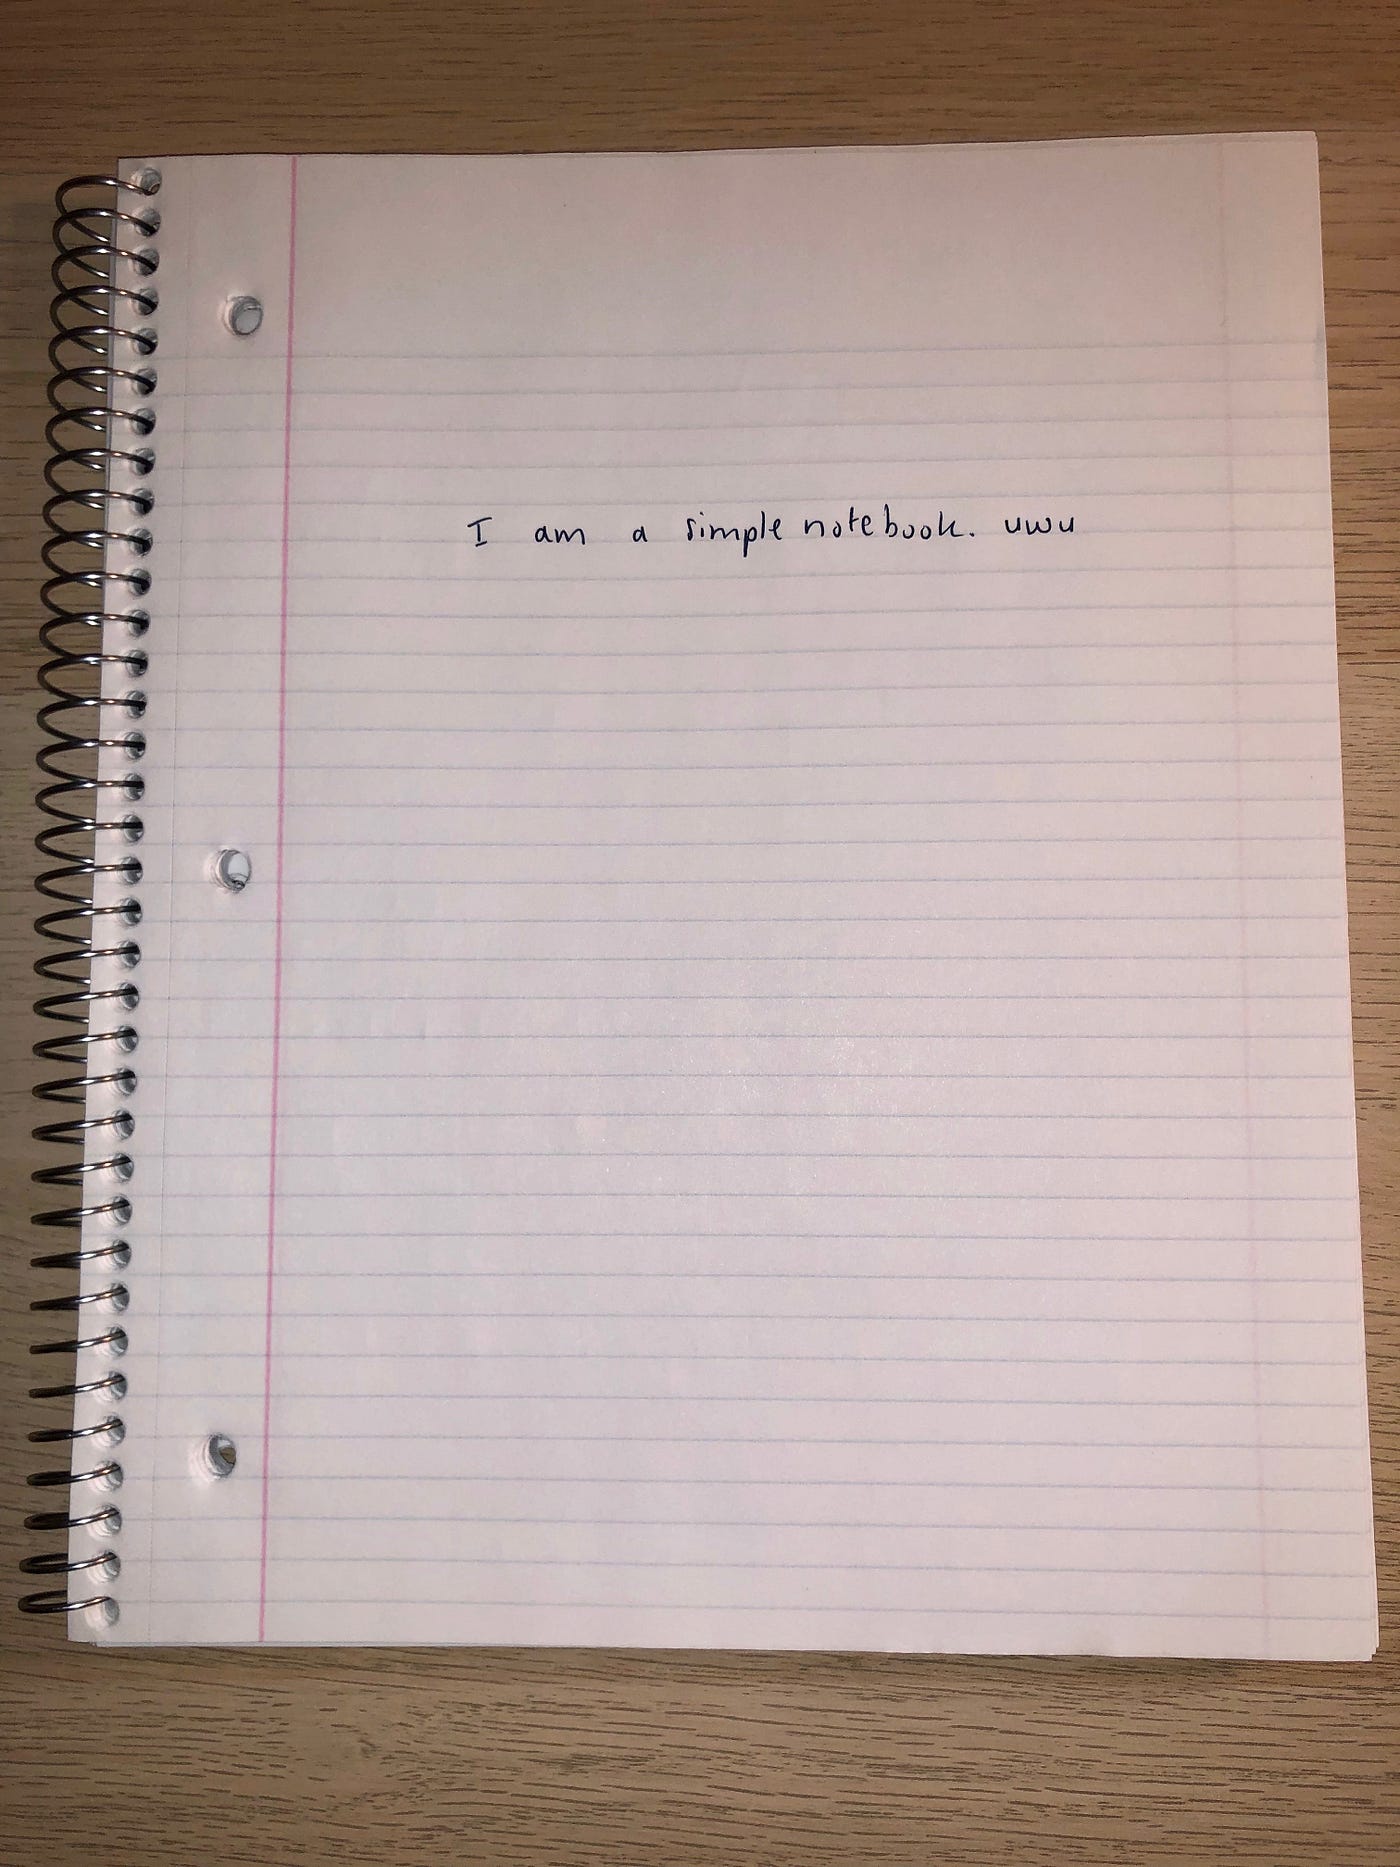 The Simple Notebook : A Lefty's Nightmare, by Makayla Murphy